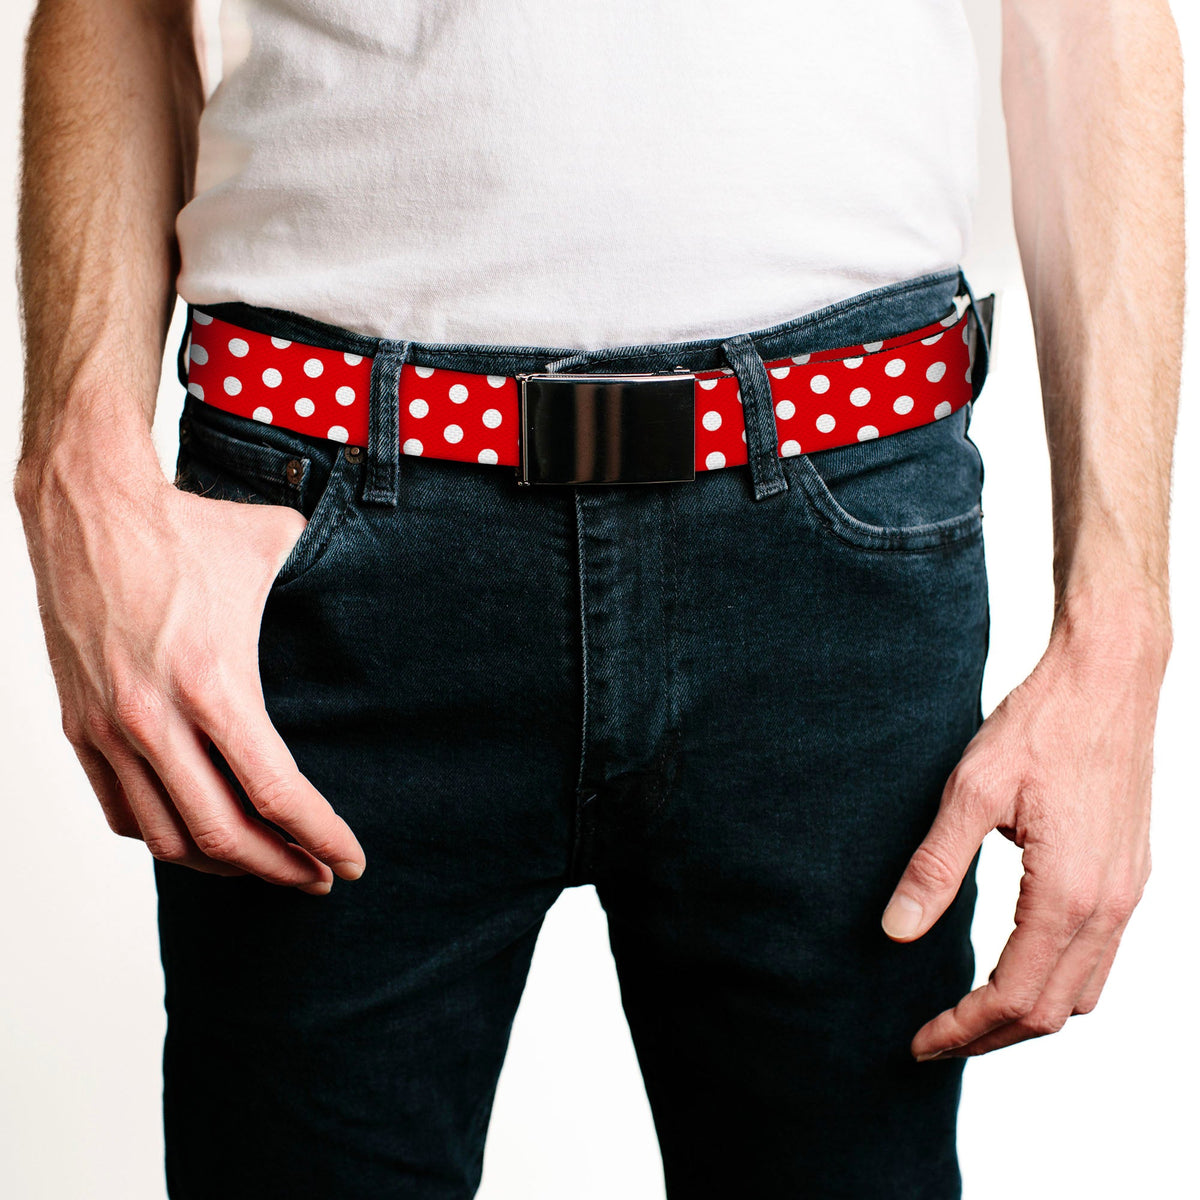 Chrome Buckle Web Belt - Minnie Mouse Polka Dots Red/White Webbing